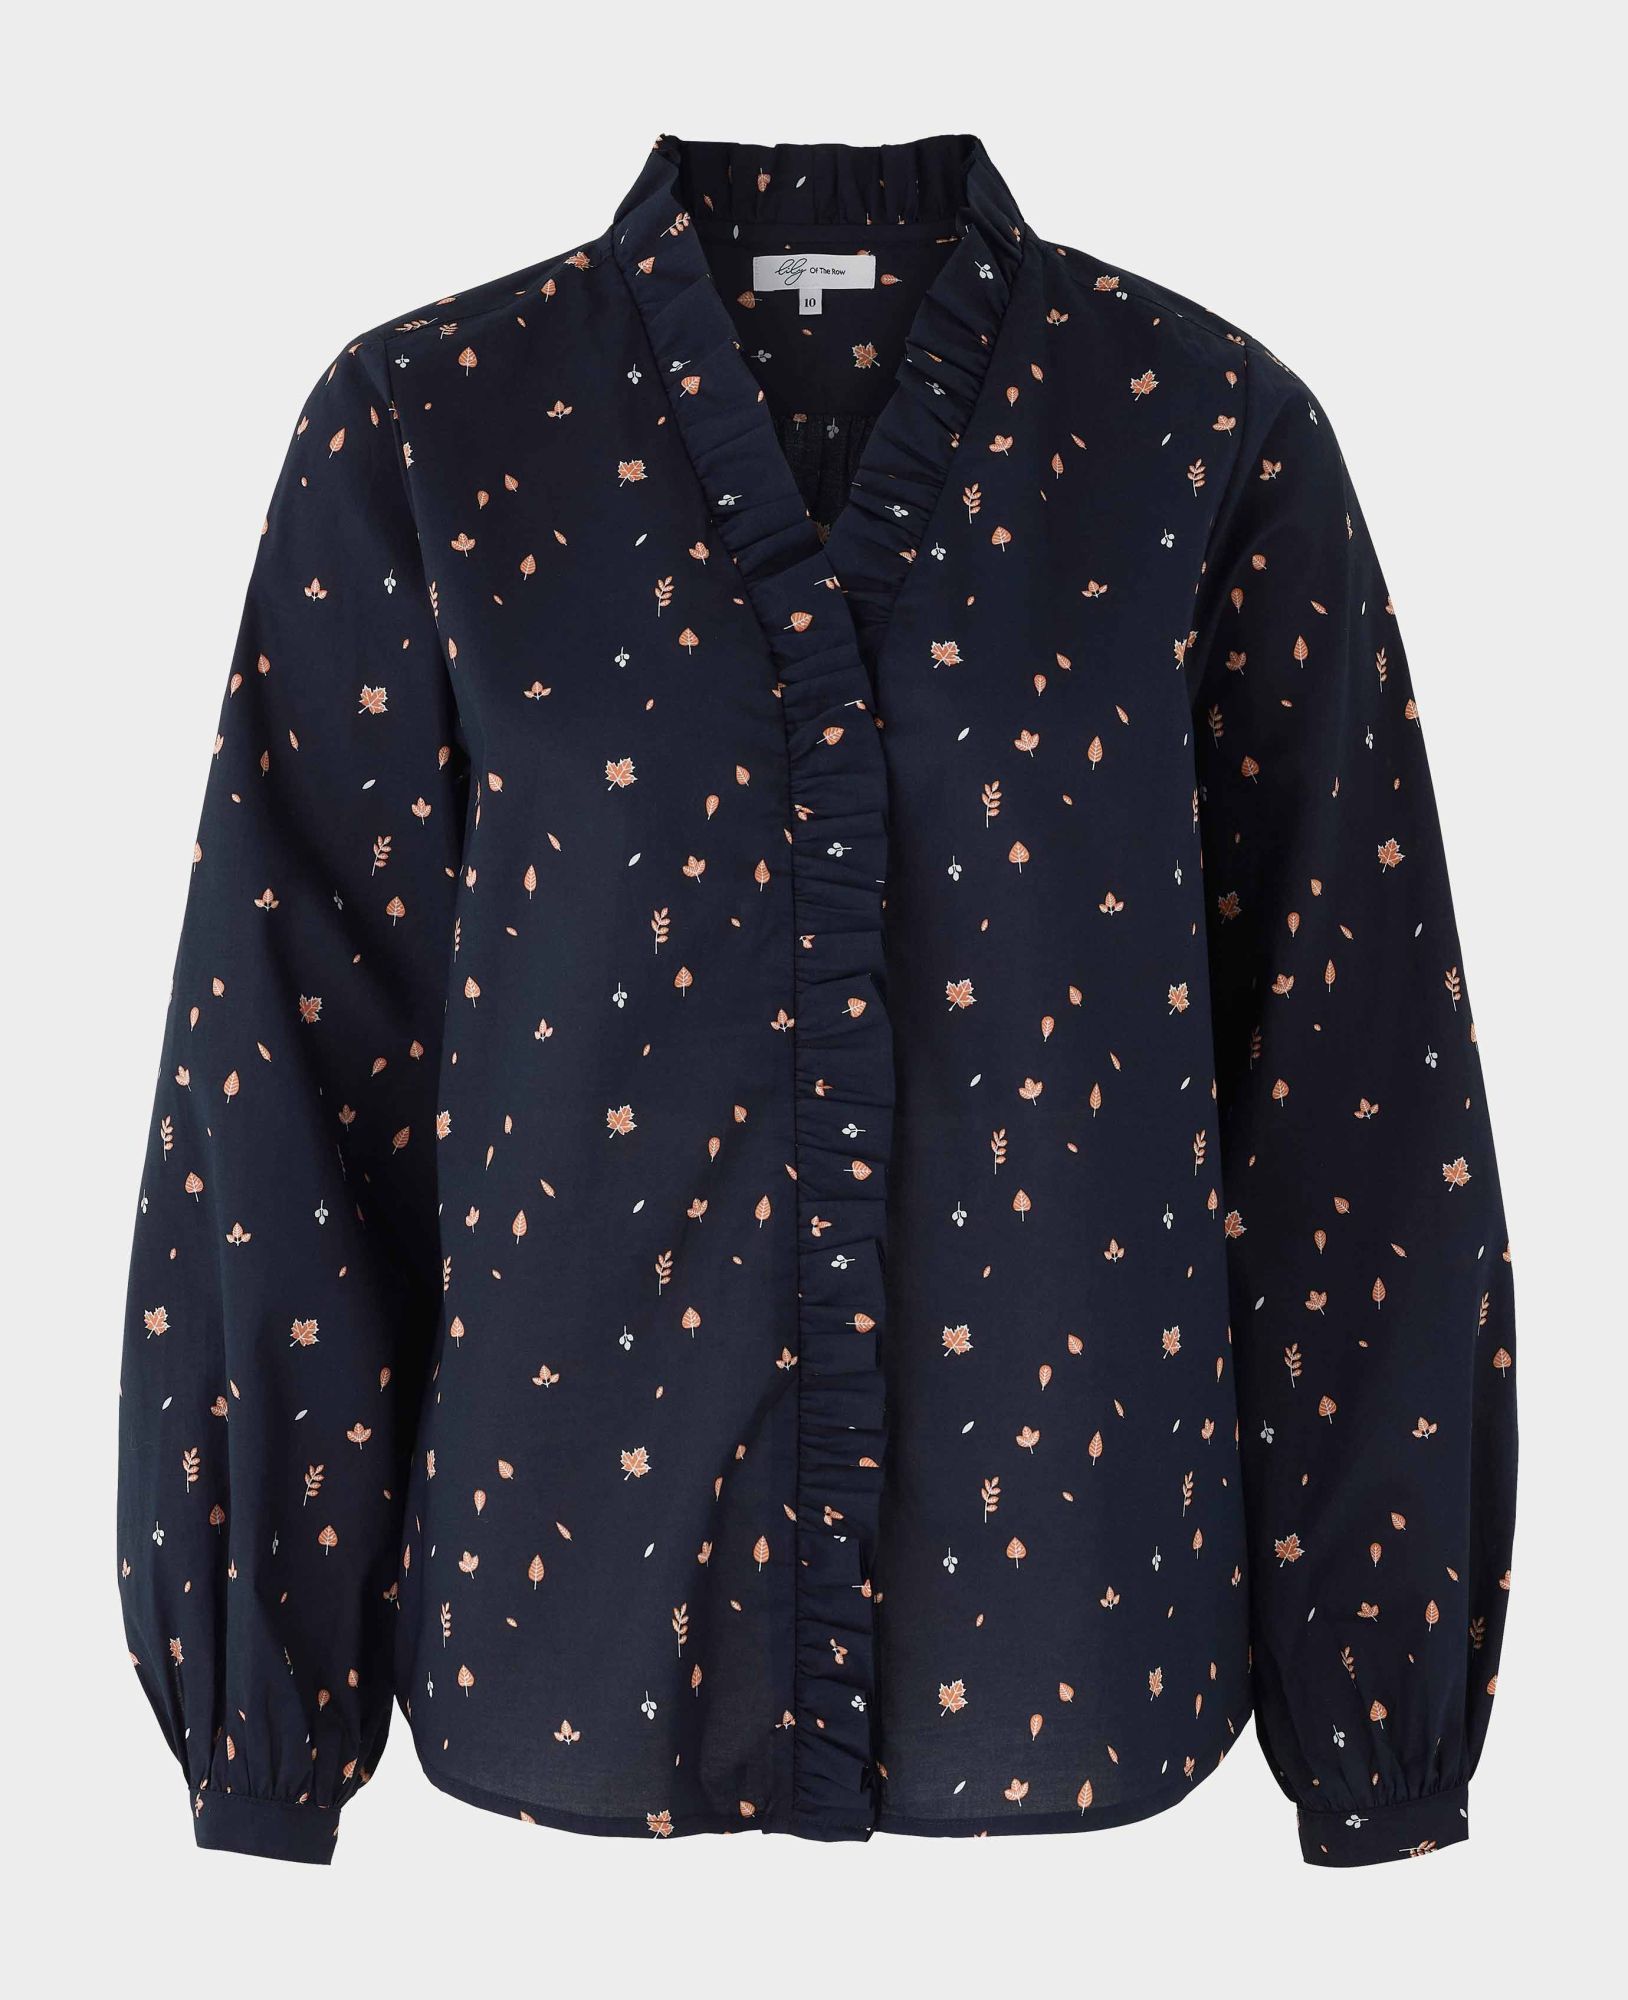 Women's Navy Leaf Print Semi Fitted Shirt 12